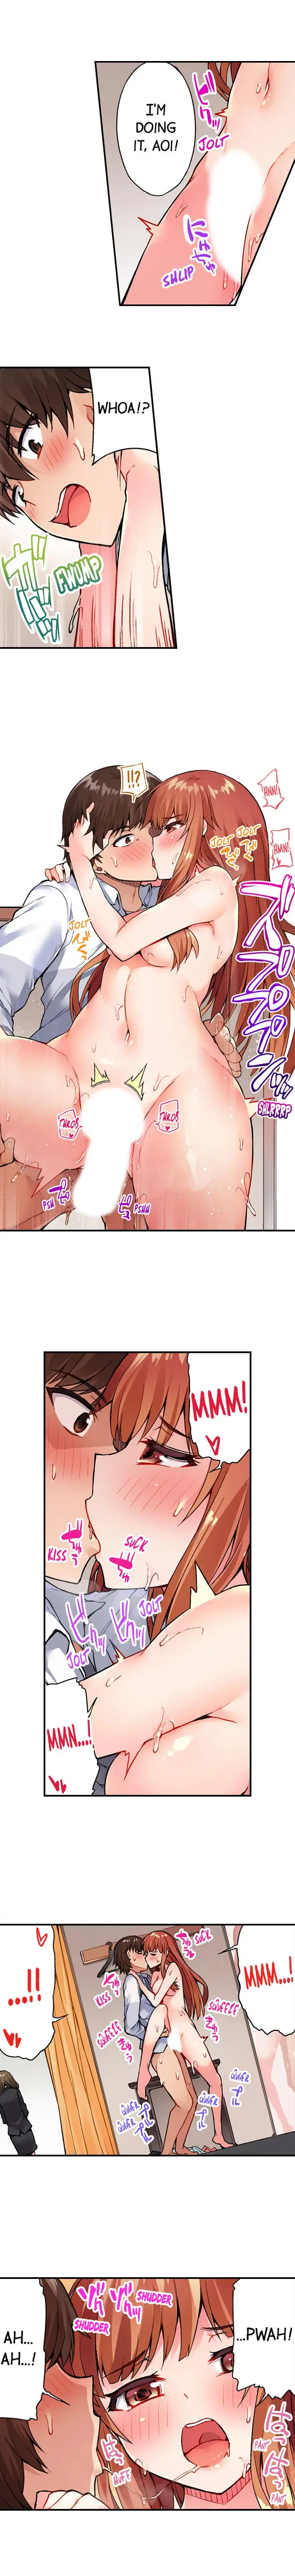 Traditional Job of Washing Girls’ Body - Chapter 25 Page 4